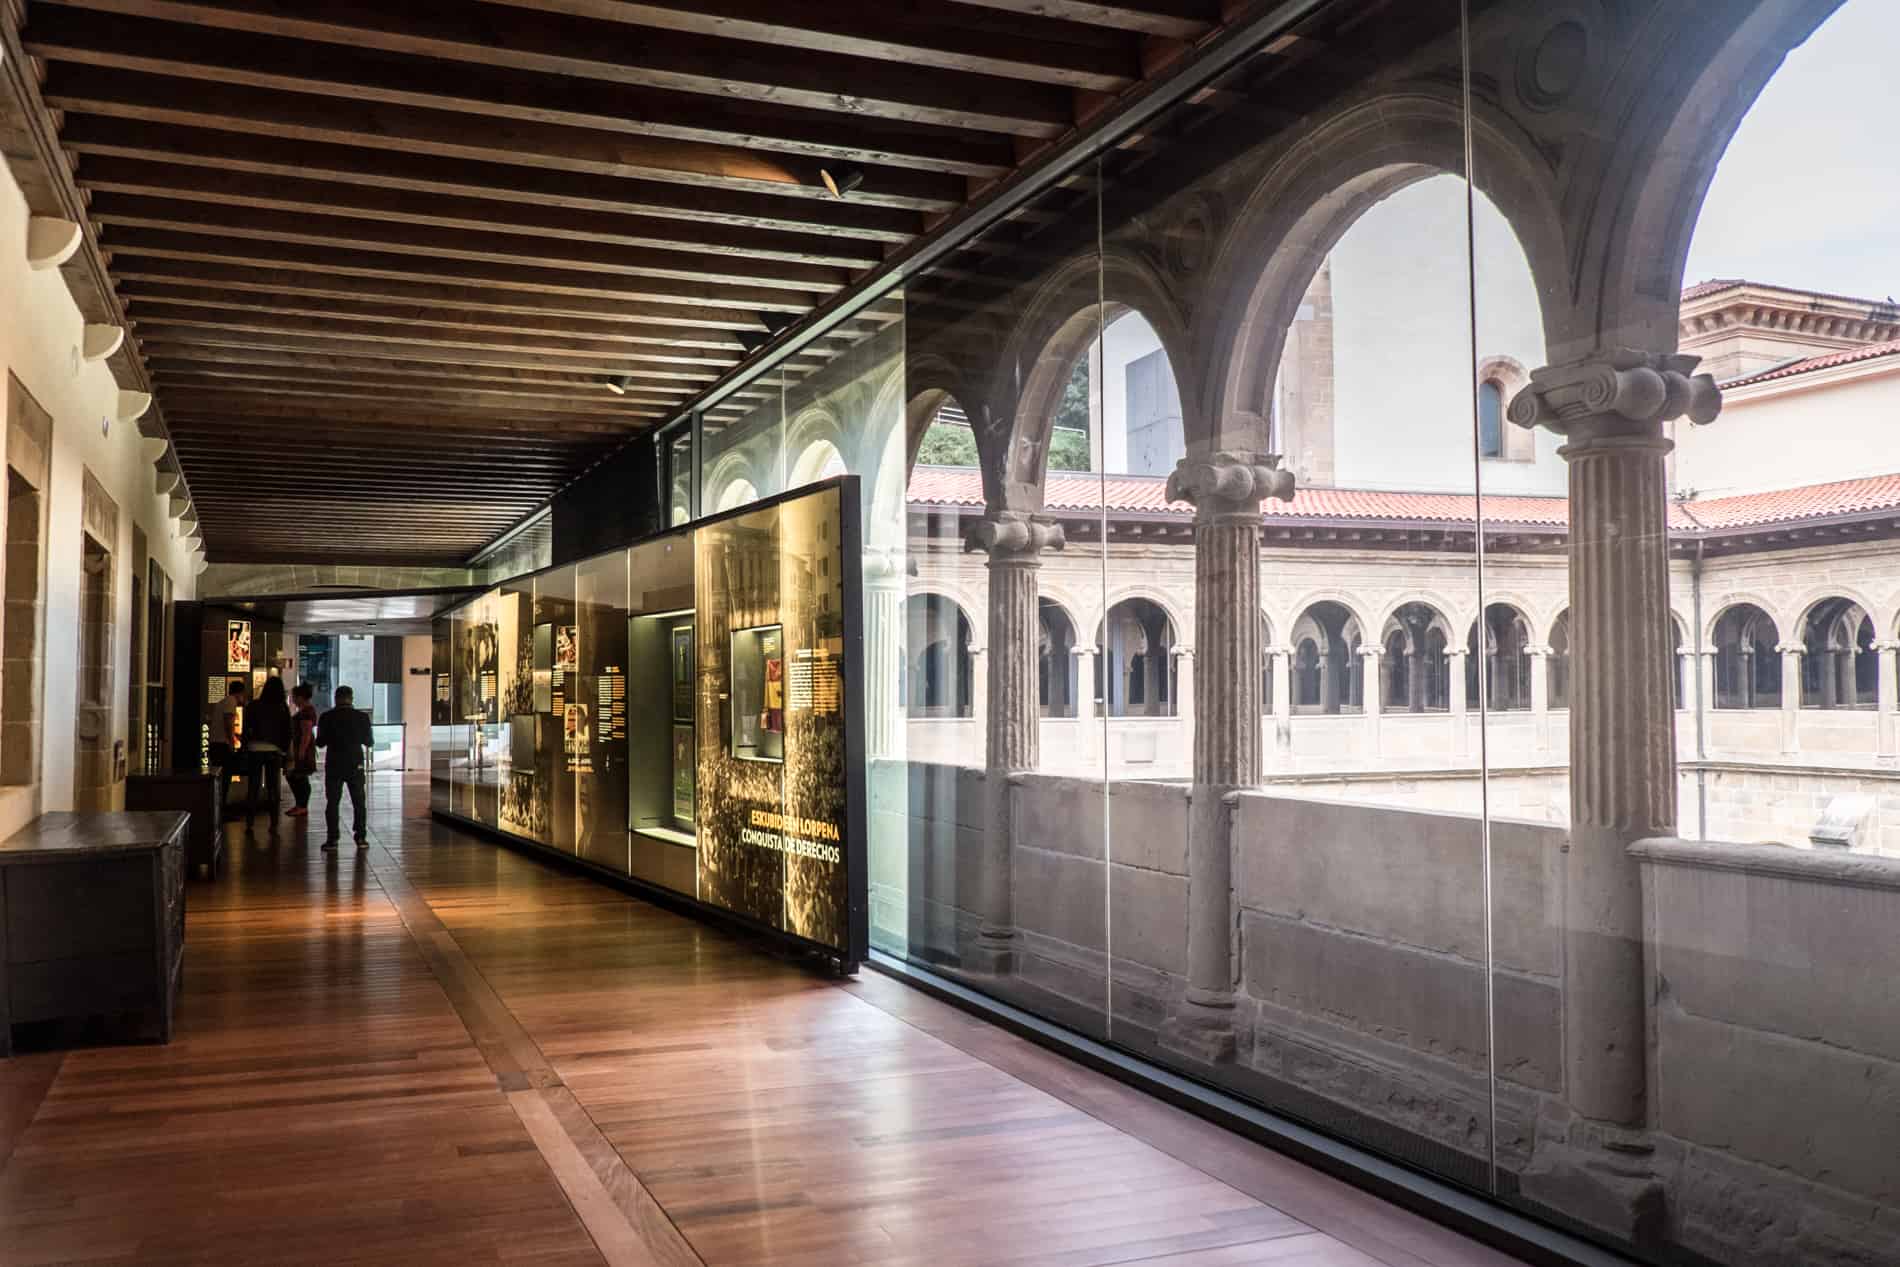 Exhibits line a hall in an old convent in San Sebastian, now the San Telmo Museum of Basque history.